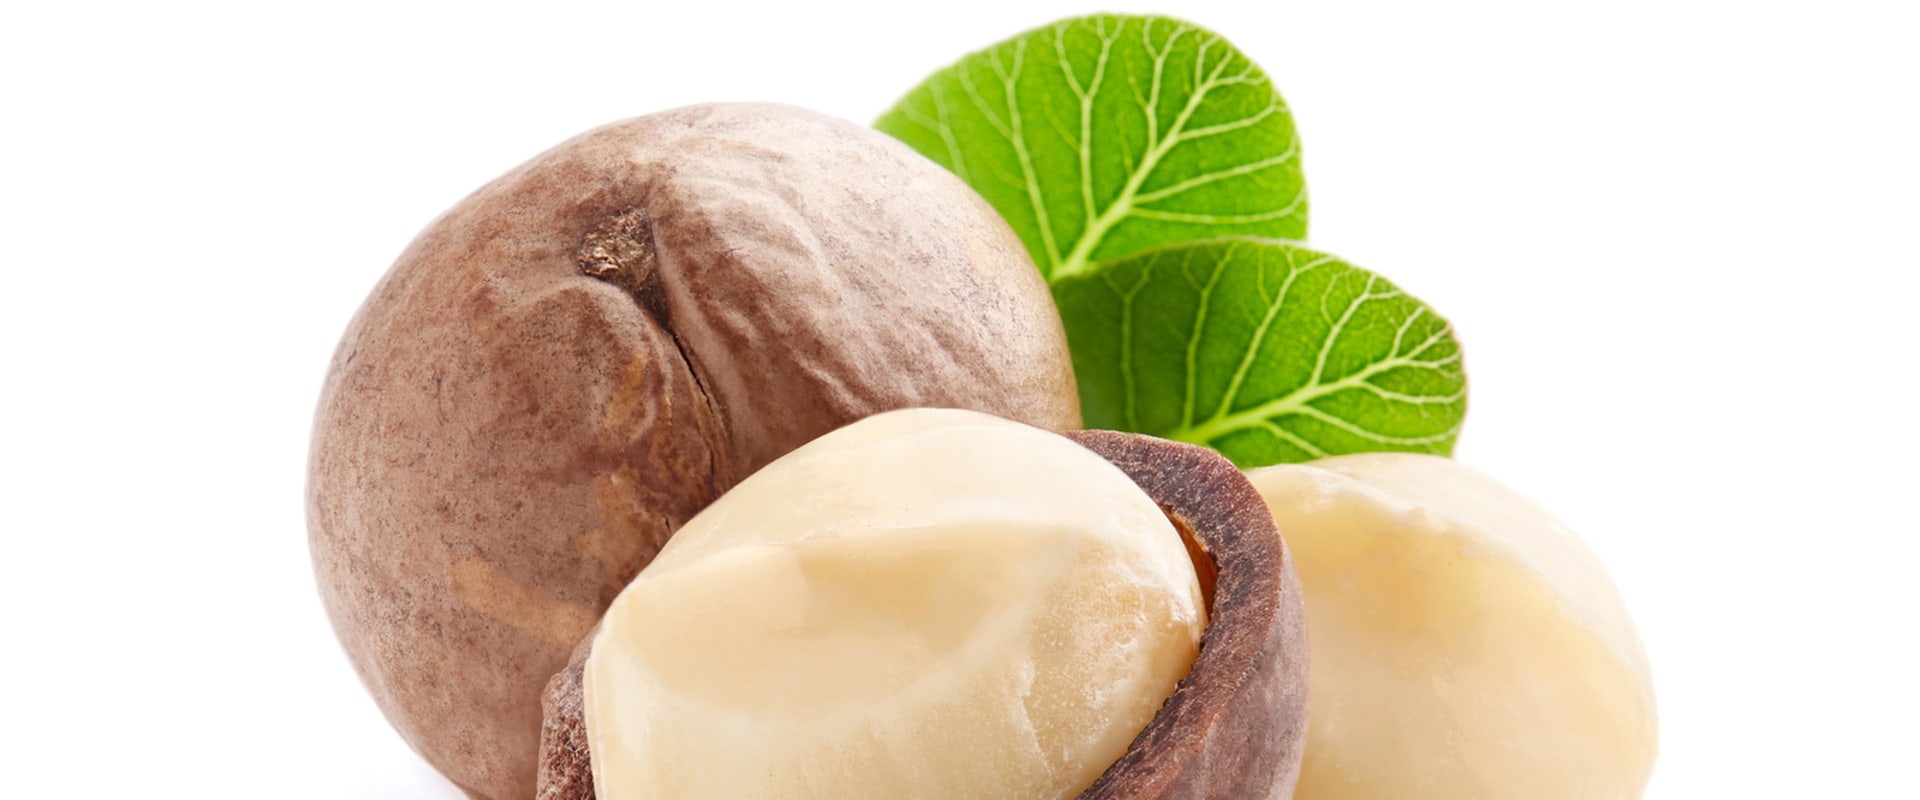 Which country has the best macadamia nuts?